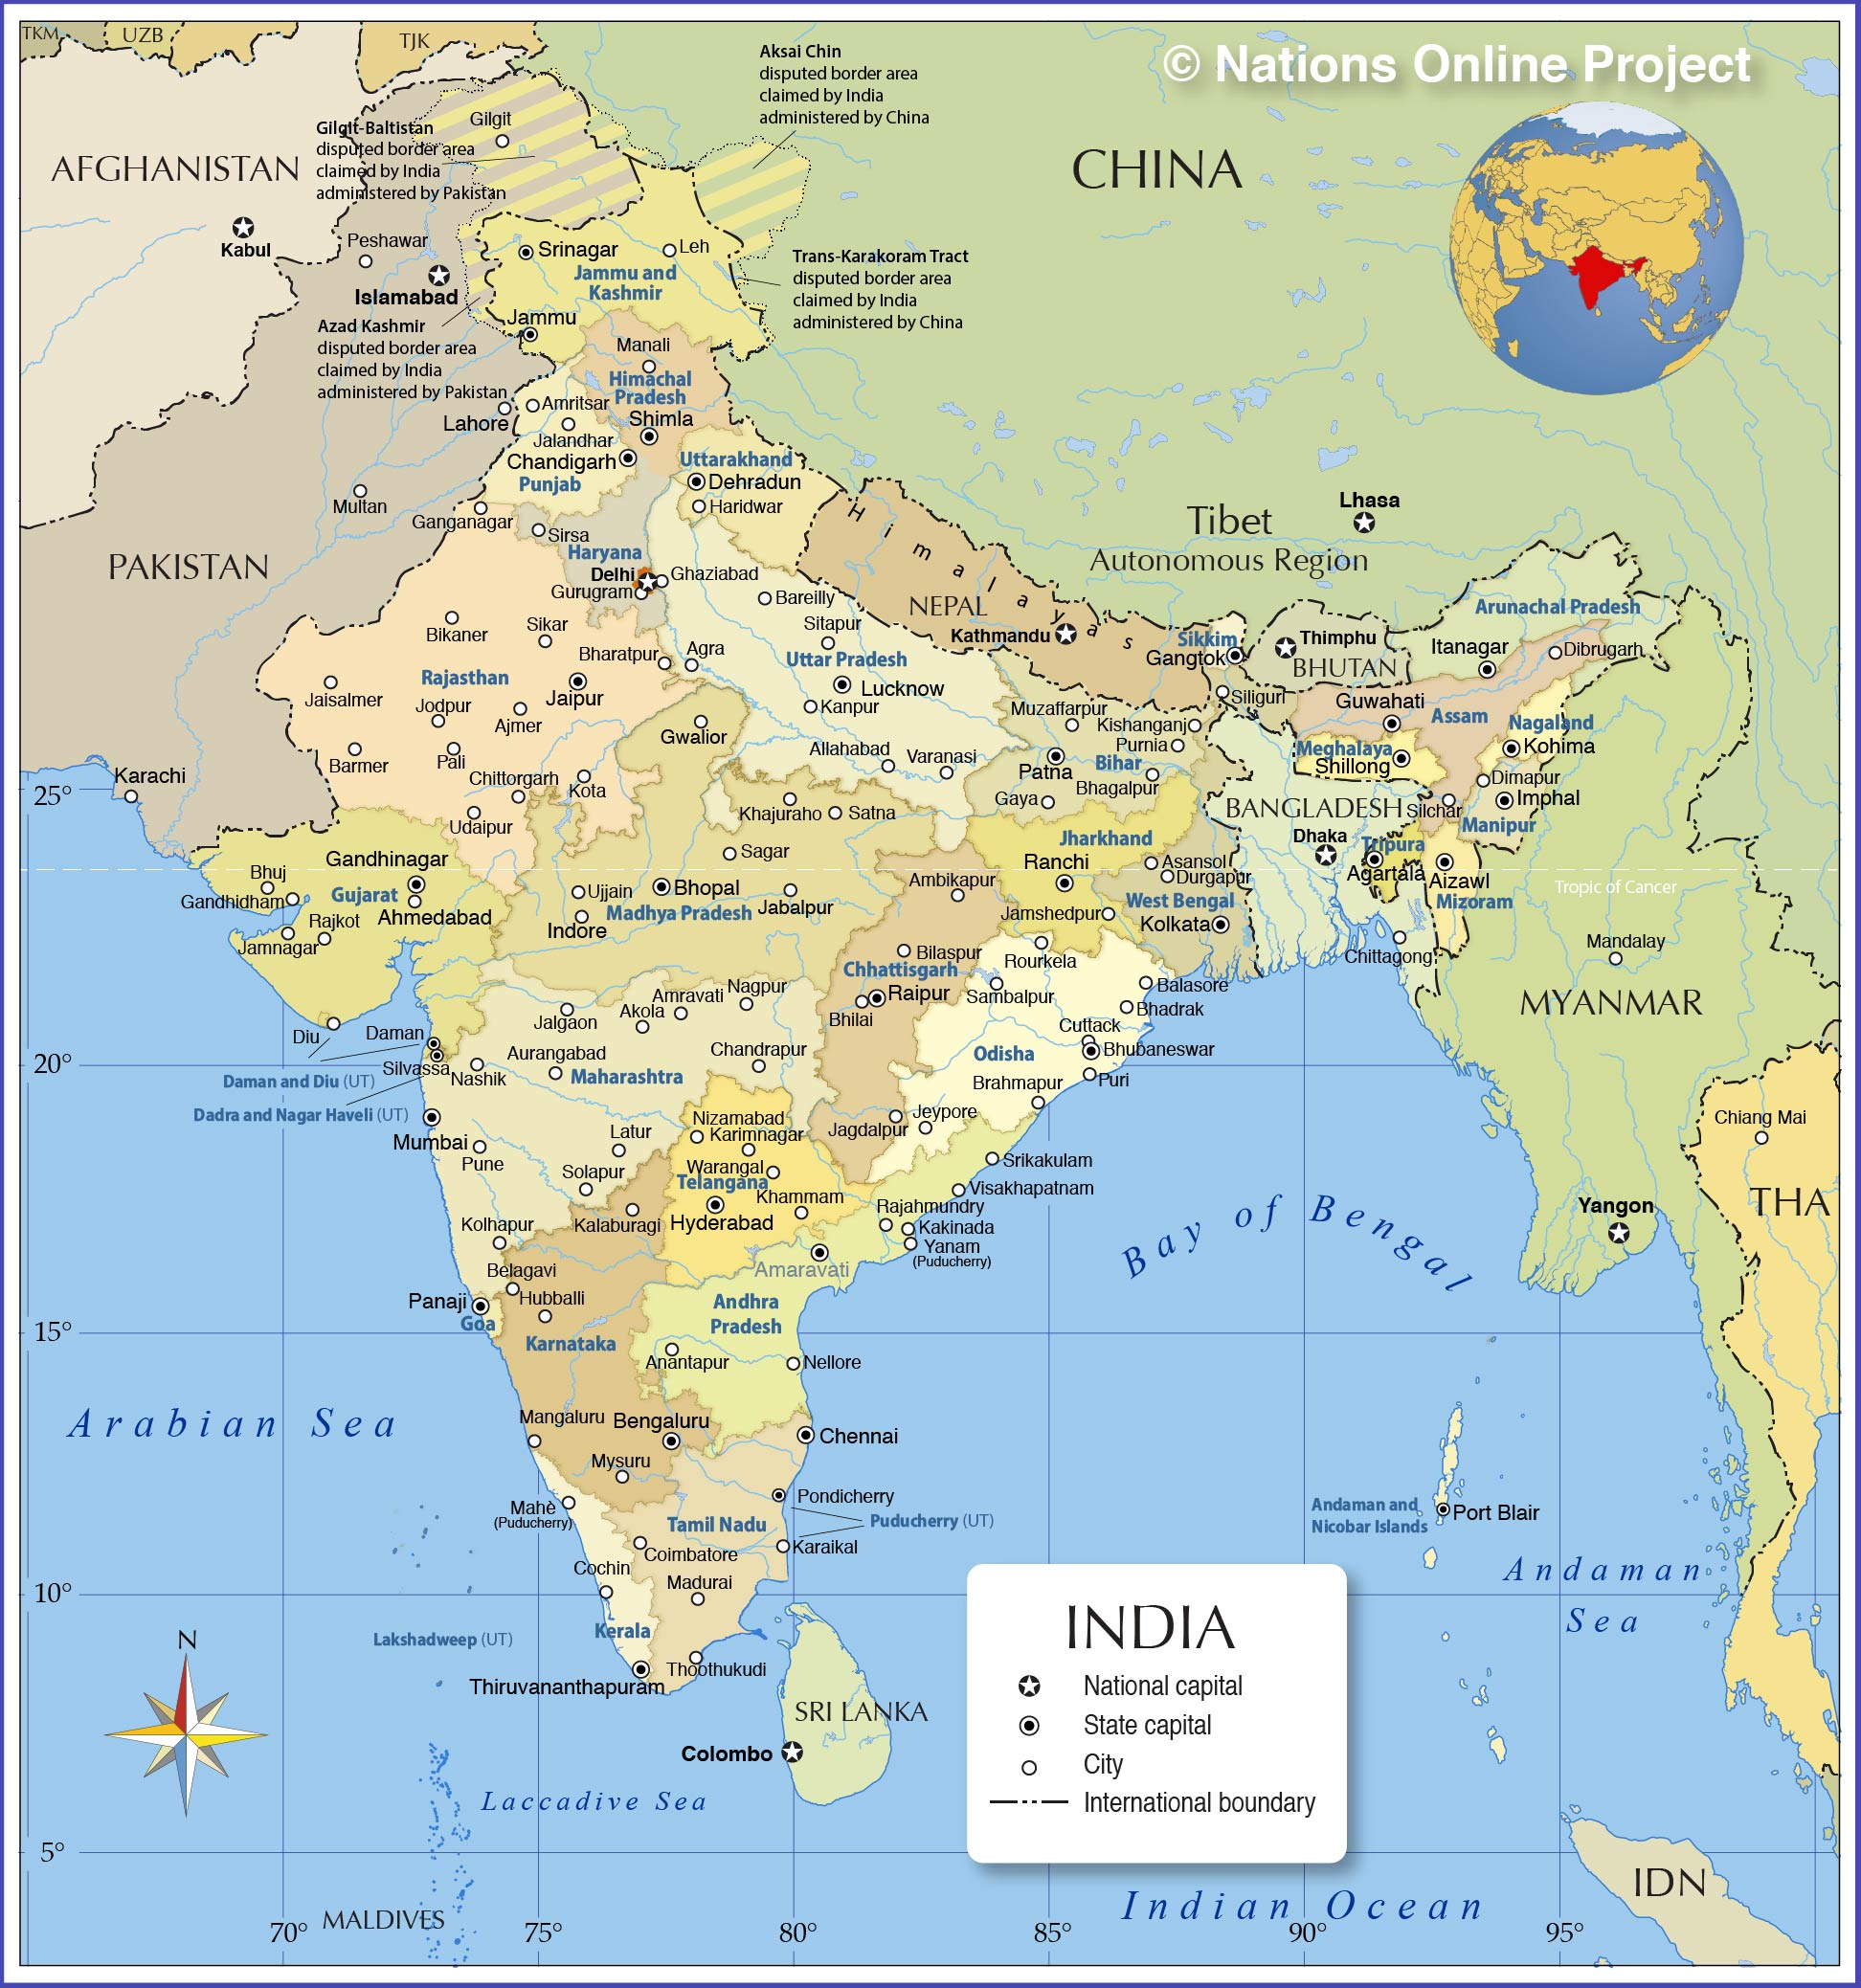 Administrative Map of India with states, union territories, capitals and major cities